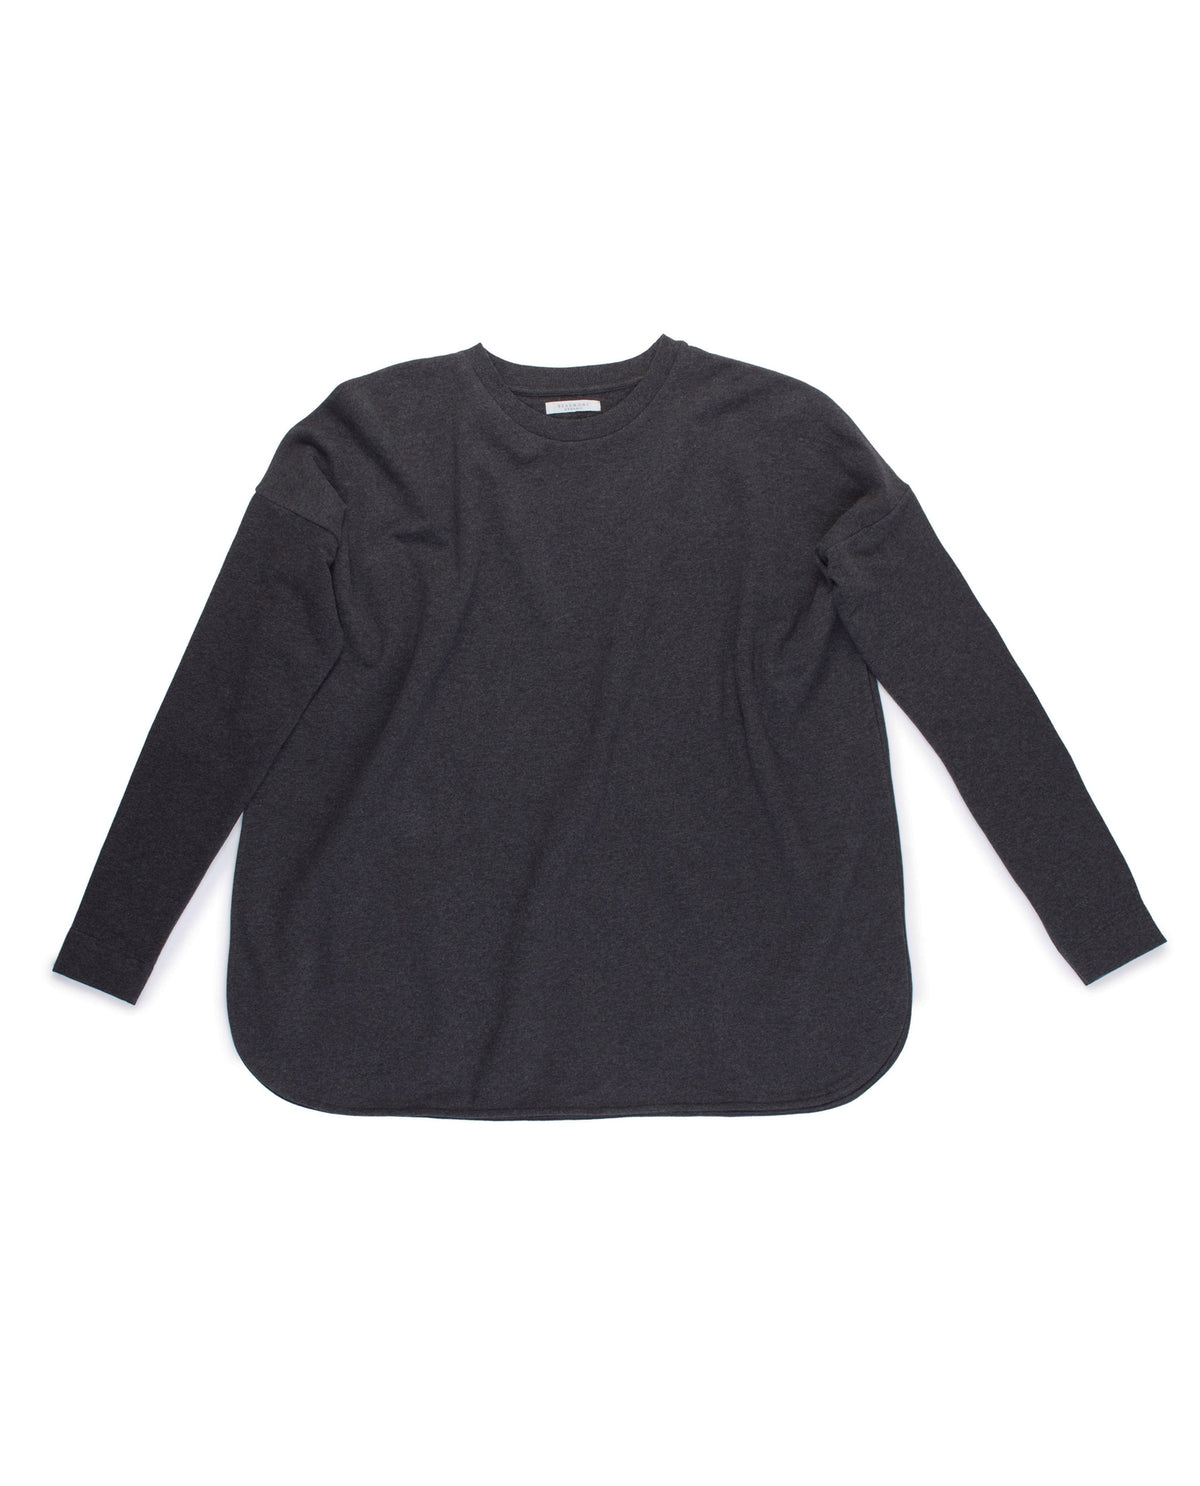 Long Sleeved Tops – Beaumont Organic